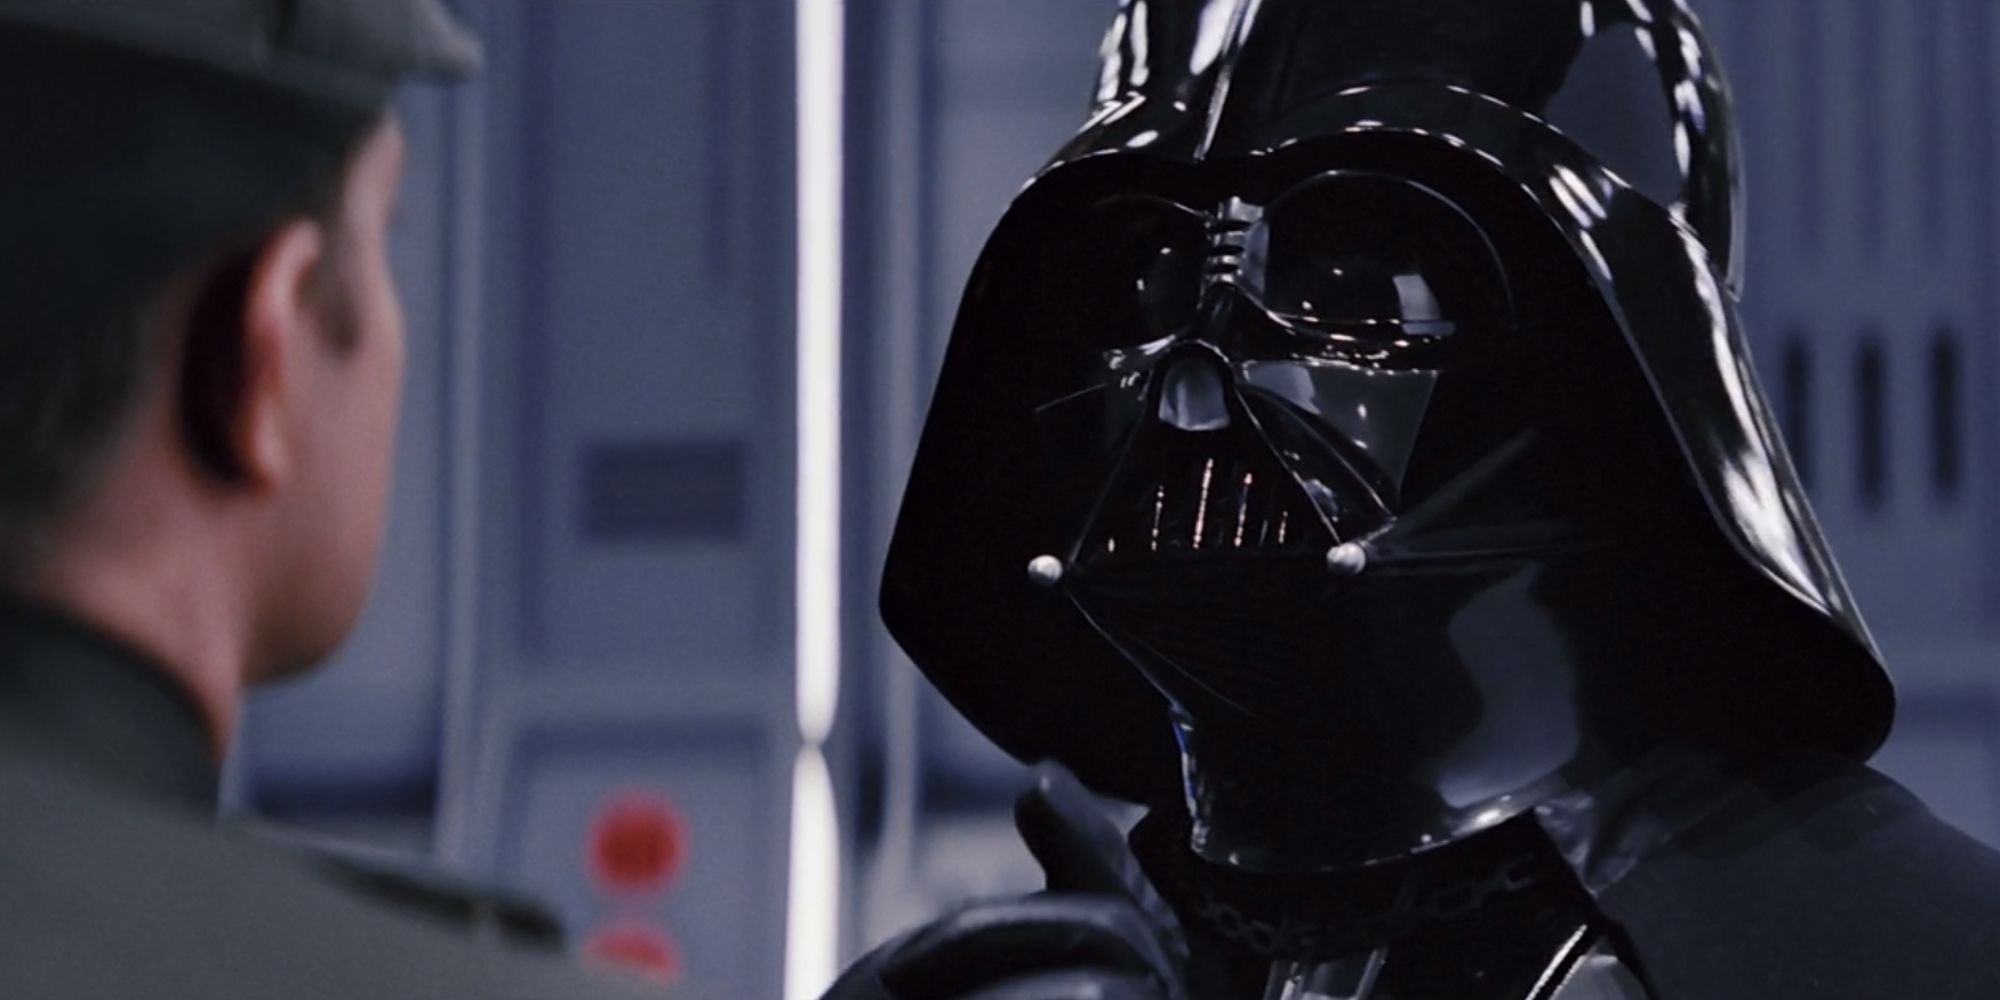 Darth Vader chastising the commander aboard the Death Star II in Return Of The Jedi